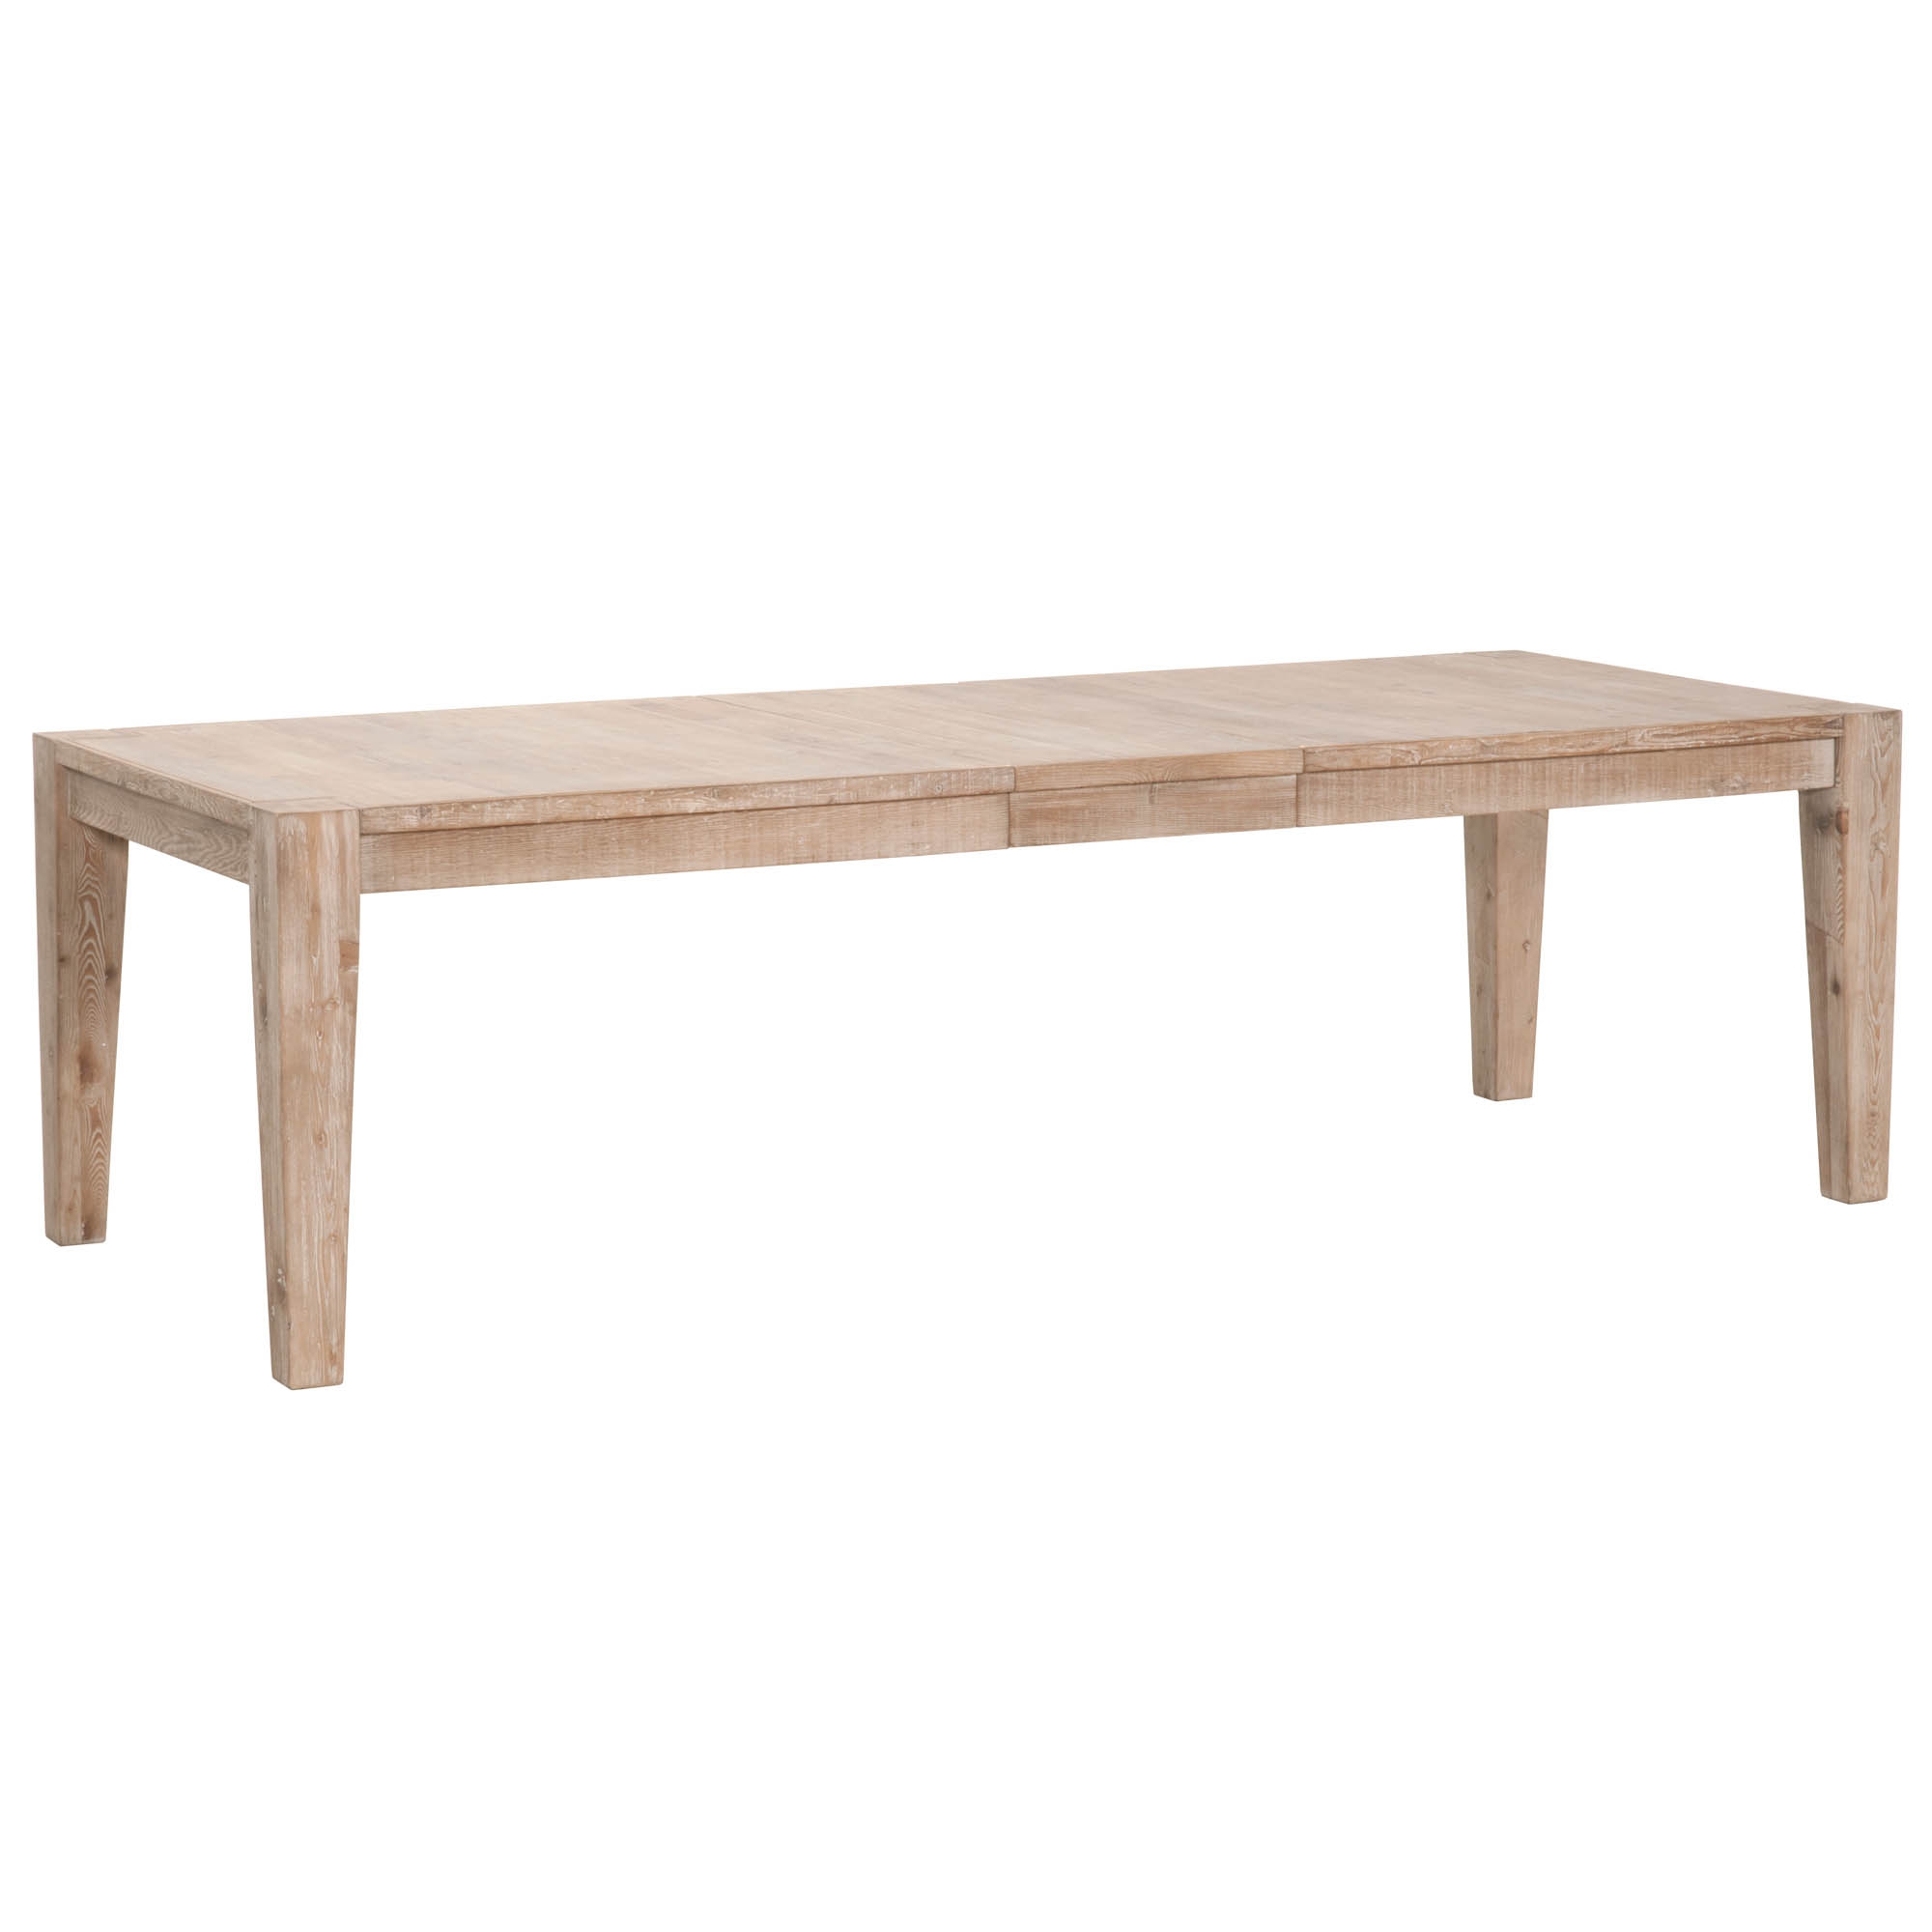 Soren Extension Dining Table - Image 1